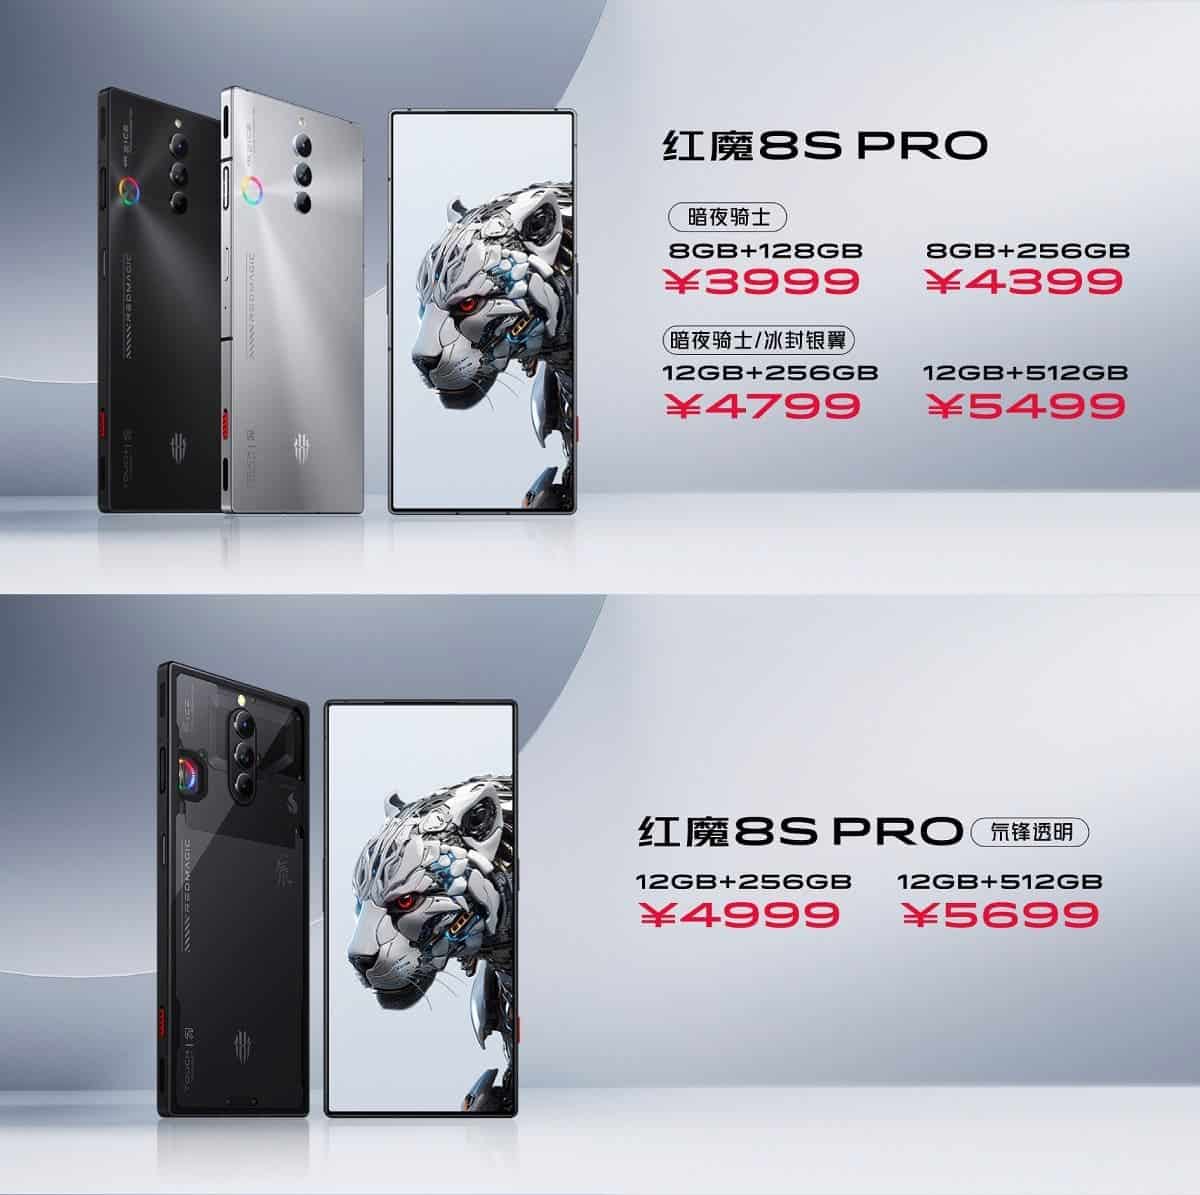 Pricing of Red Magic 8S Pro